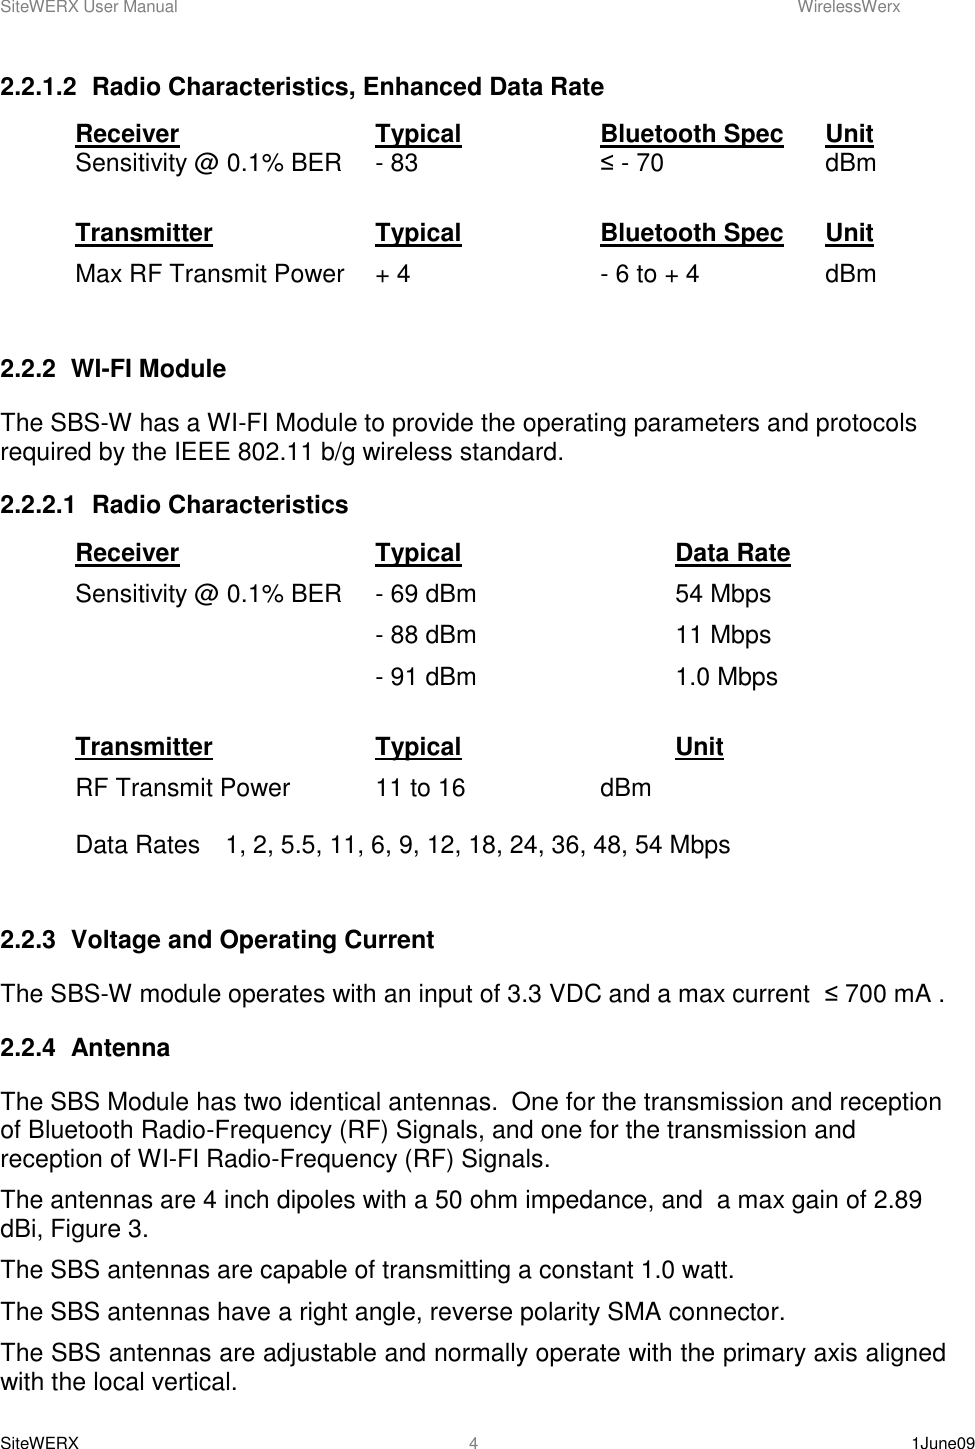 SiteWERX User Manual    WirelessWerx SiteWERX    1June09  4 2.2.1.2  Radio Characteristics, Enhanced Data Rate Receiver      Typical    Bluetooth Spec  Unit Sensitivity @ 0.1% BER  - 83       ≤ - 70      dBm  Transmitter      Typical    Bluetooth Spec  Unit Max RF Transmit Power  + 4       - 6 to + 4    dBm  2.2.2  WI-FI Module The SBS-W has a WI-FI Module to provide the operating parameters and protocols required by the IEEE 802.11 b/g wireless standard.   2.2.2.1  Radio Characteristics Receiver      Typical      Data Rate Sensitivity @ 0.1% BER  - 69 dBm       54 Mbps         - 88 dBm      11 Mbps         - 91 dBm      1.0 Mbps  Transmitter      Typical      Unit RF Transmit Power   11 to 16     dBm  Data Rates  1, 2, 5.5, 11, 6, 9, 12, 18, 24, 36, 48, 54 Mbps  2.2.3  Voltage and Operating Current The SBS-W module operates with an input of 3.3 VDC and a max current  ≤ 700 mA . 2.2.4  Antenna The SBS Module has two identical antennas.  One for the transmission and reception of Bluetooth Radio-Frequency (RF) Signals, and one for the transmission and reception of WI-FI Radio-Frequency (RF) Signals. The antennas are 4 inch dipoles with a 50 ohm impedance, and  a max gain of 2.89 dBi, Figure 3. The SBS antennas are capable of transmitting a constant 1.0 watt. The SBS antennas have a right angle, reverse polarity SMA connector. The SBS antennas are adjustable and normally operate with the primary axis aligned with the local vertical. 